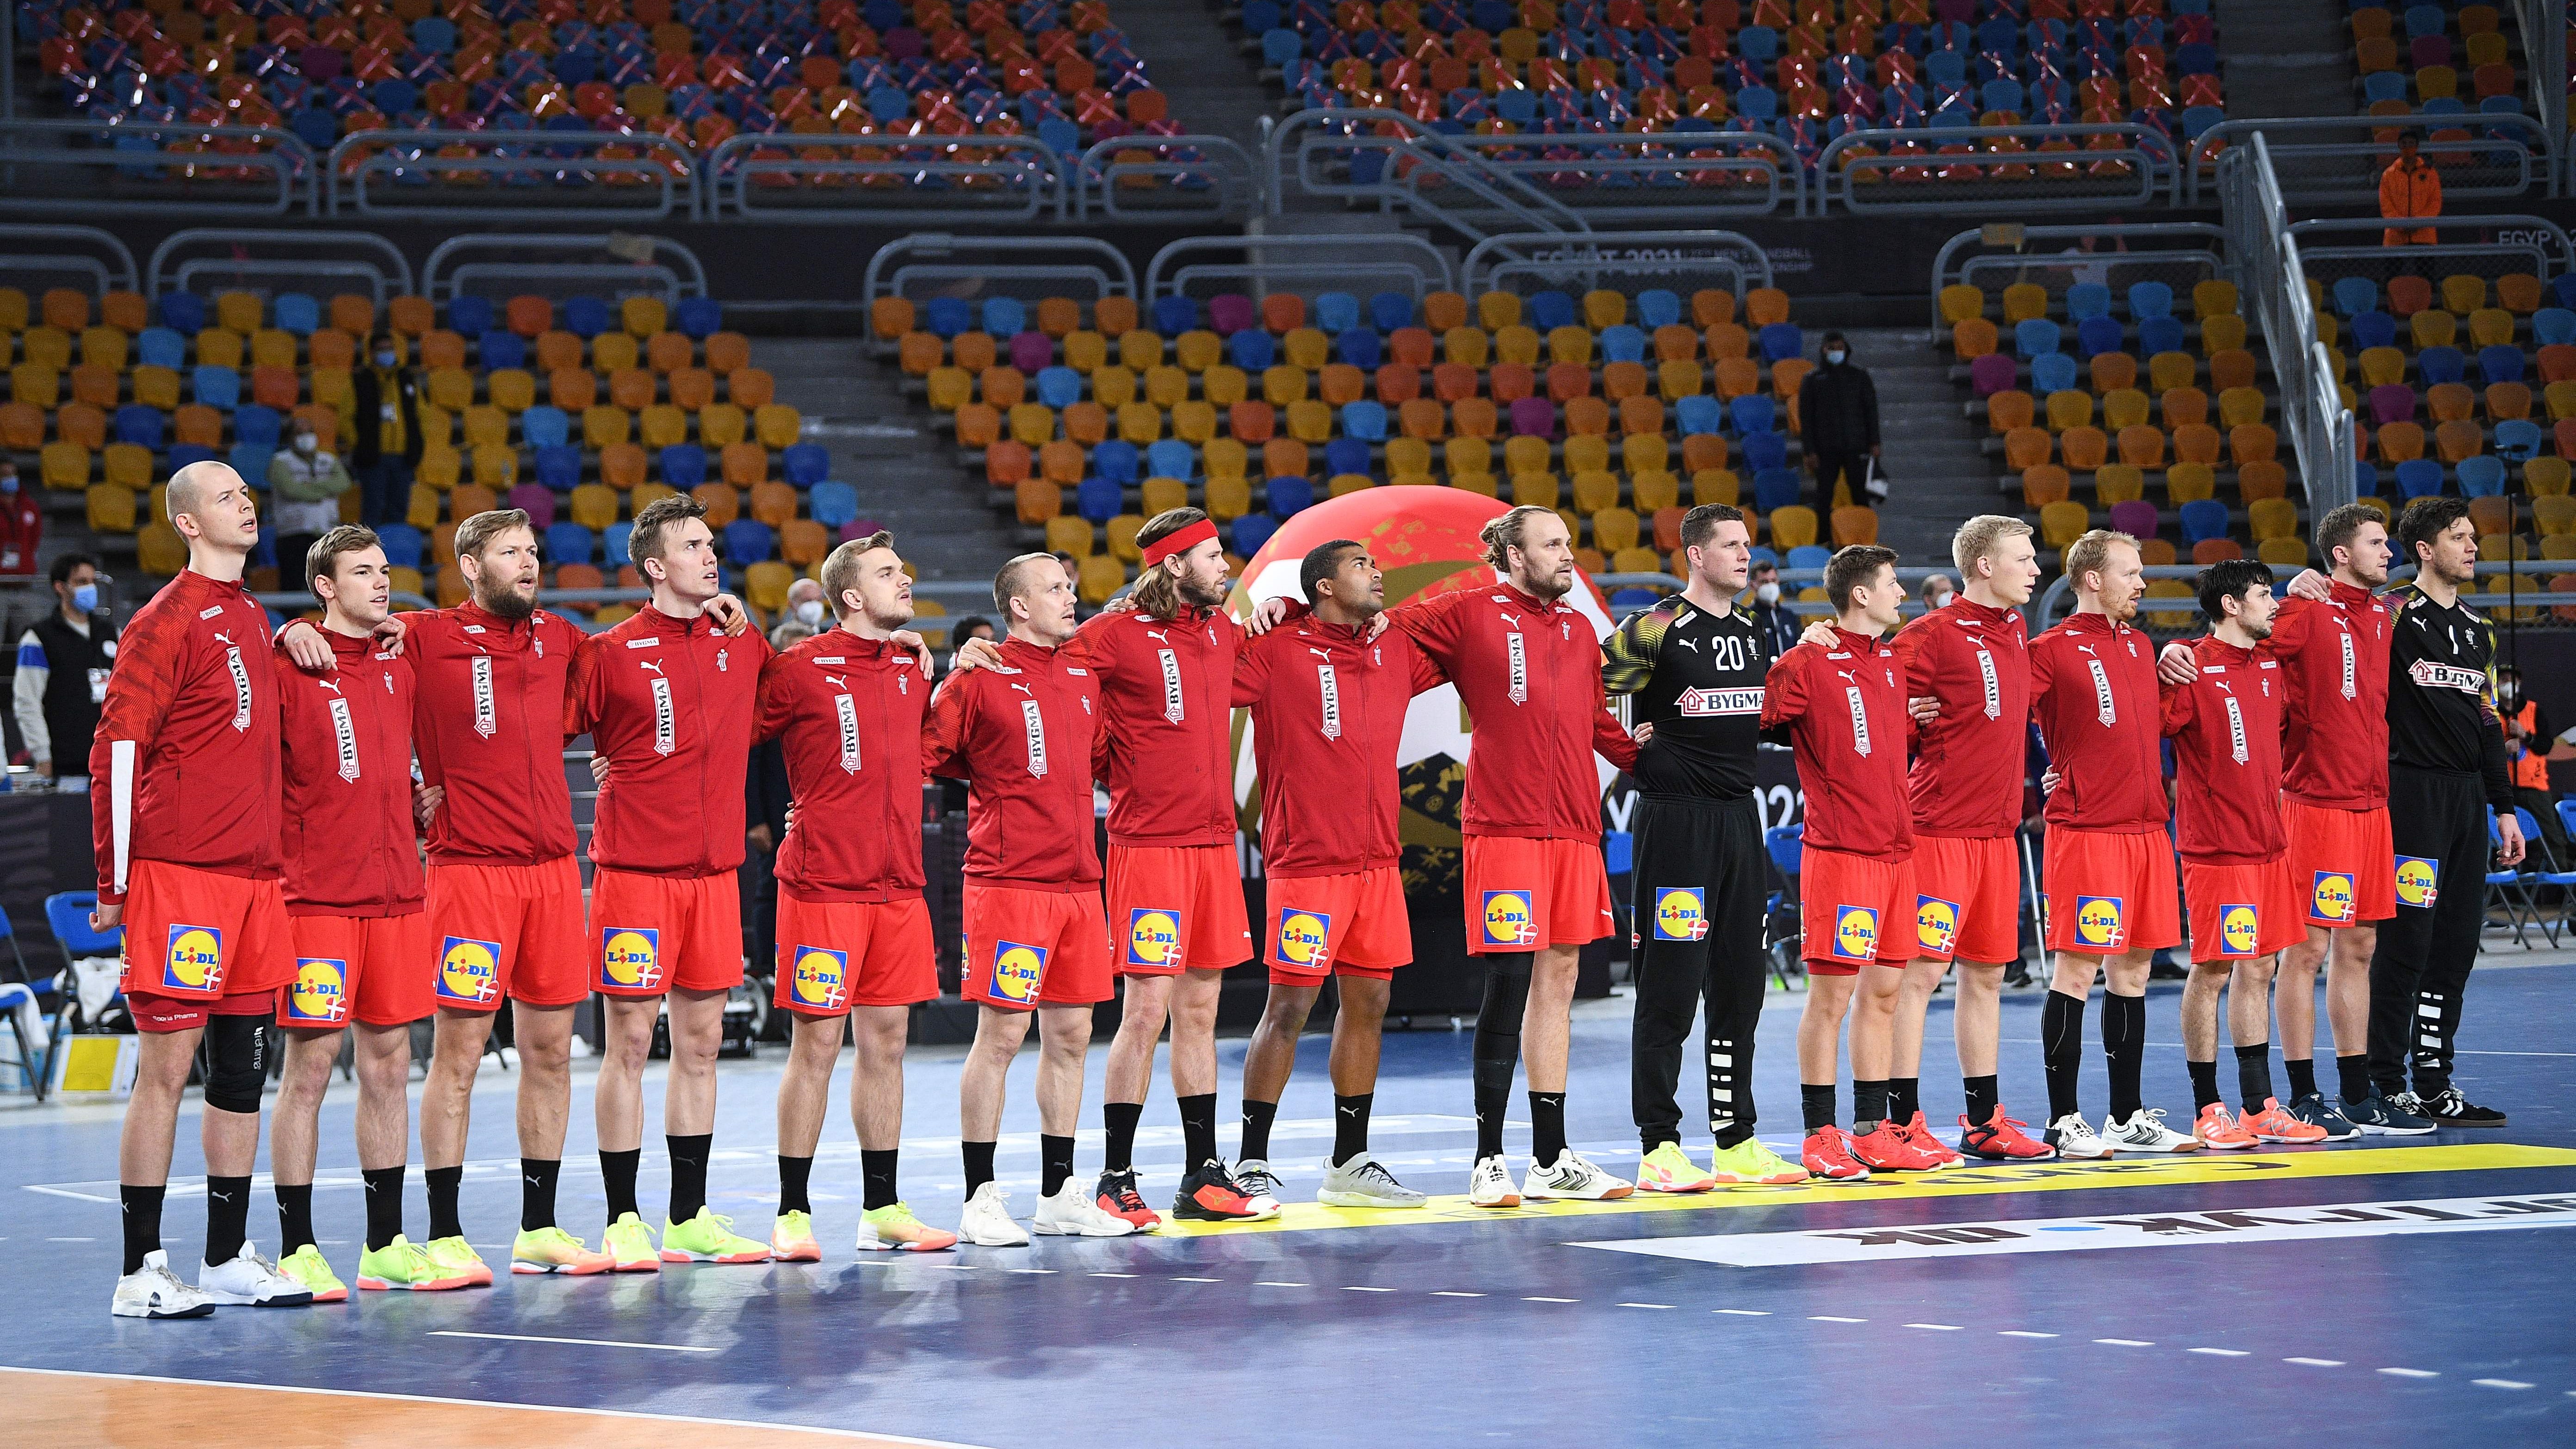 Denmark are the reigning world champion in men's handball and favorites at Tokyo 2020